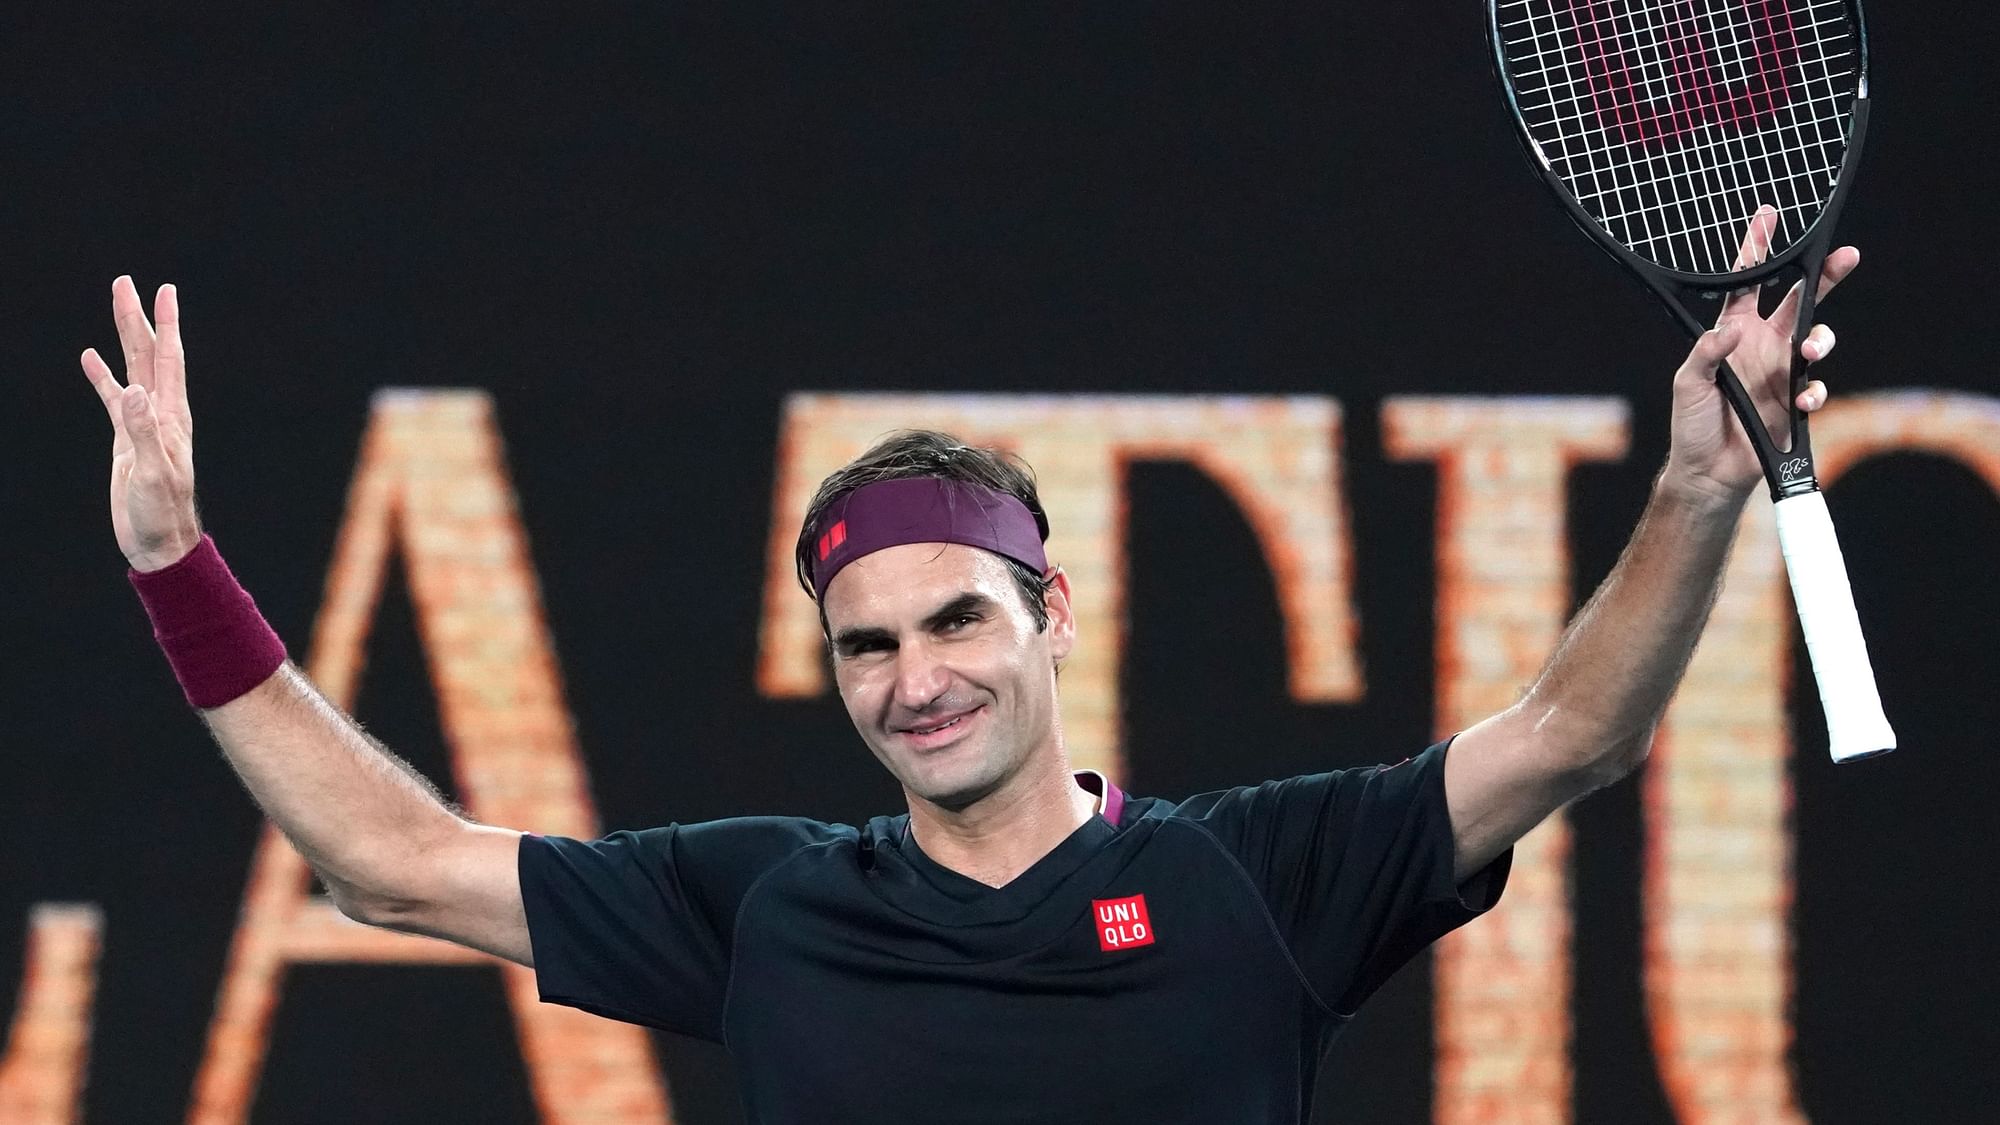 Ruthless Swiss master Roger Federer Wednesday, 22 January said he had “plenty left in the tank” as he kept intact his 20-year record of reaching at least the third round of the Australian Open after crushing Serb Filip Krajinovic.